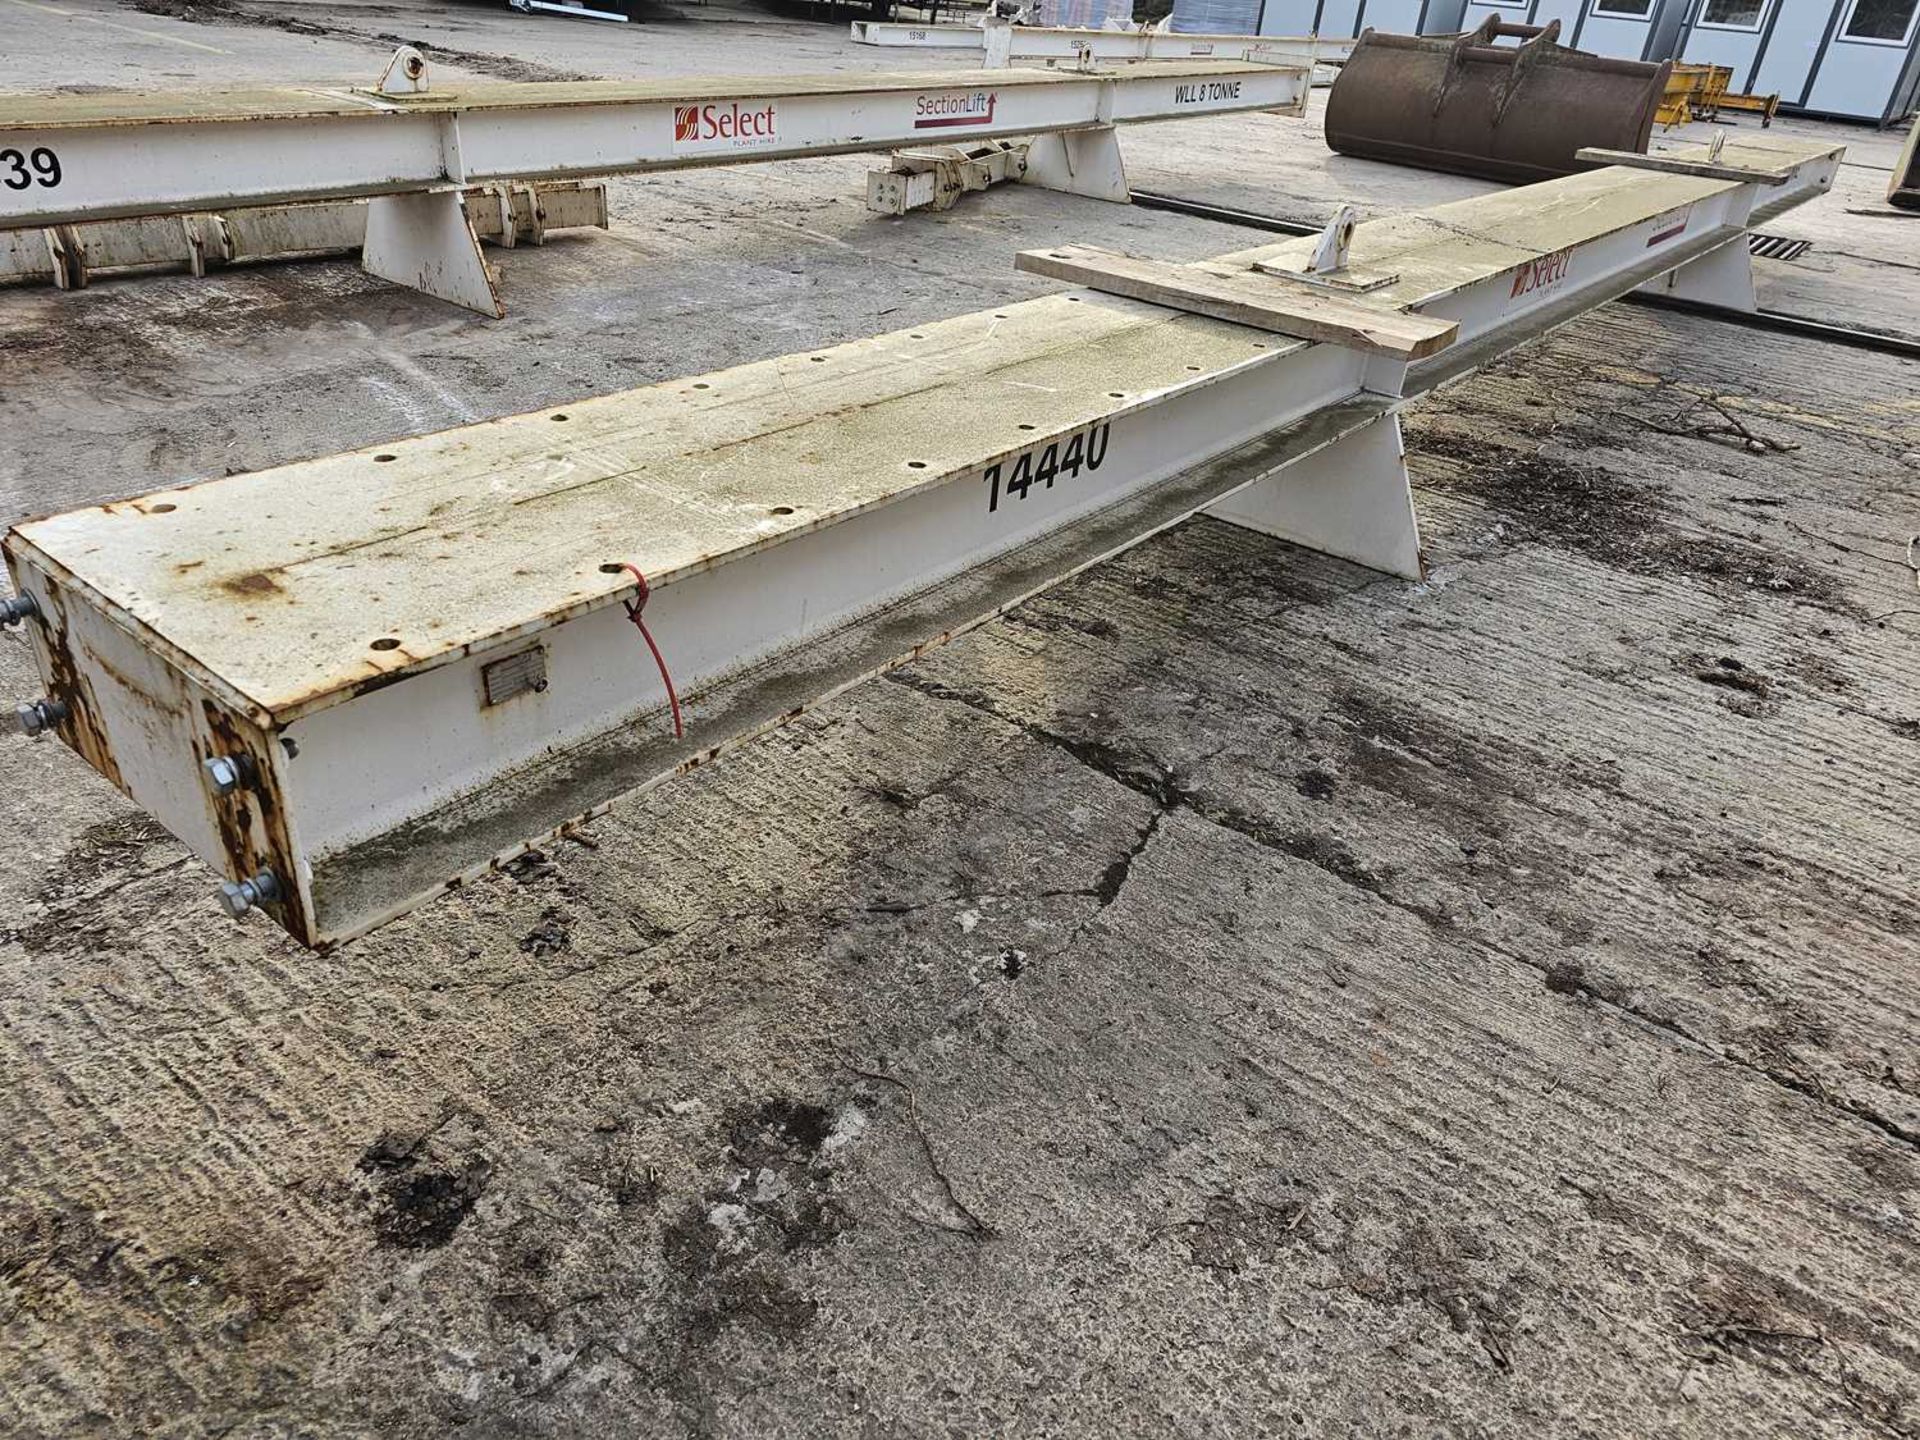 2019 Section Lift 10.65m x 2.5m Adjustable 8 Ton Spreader Beam - Image 4 of 7